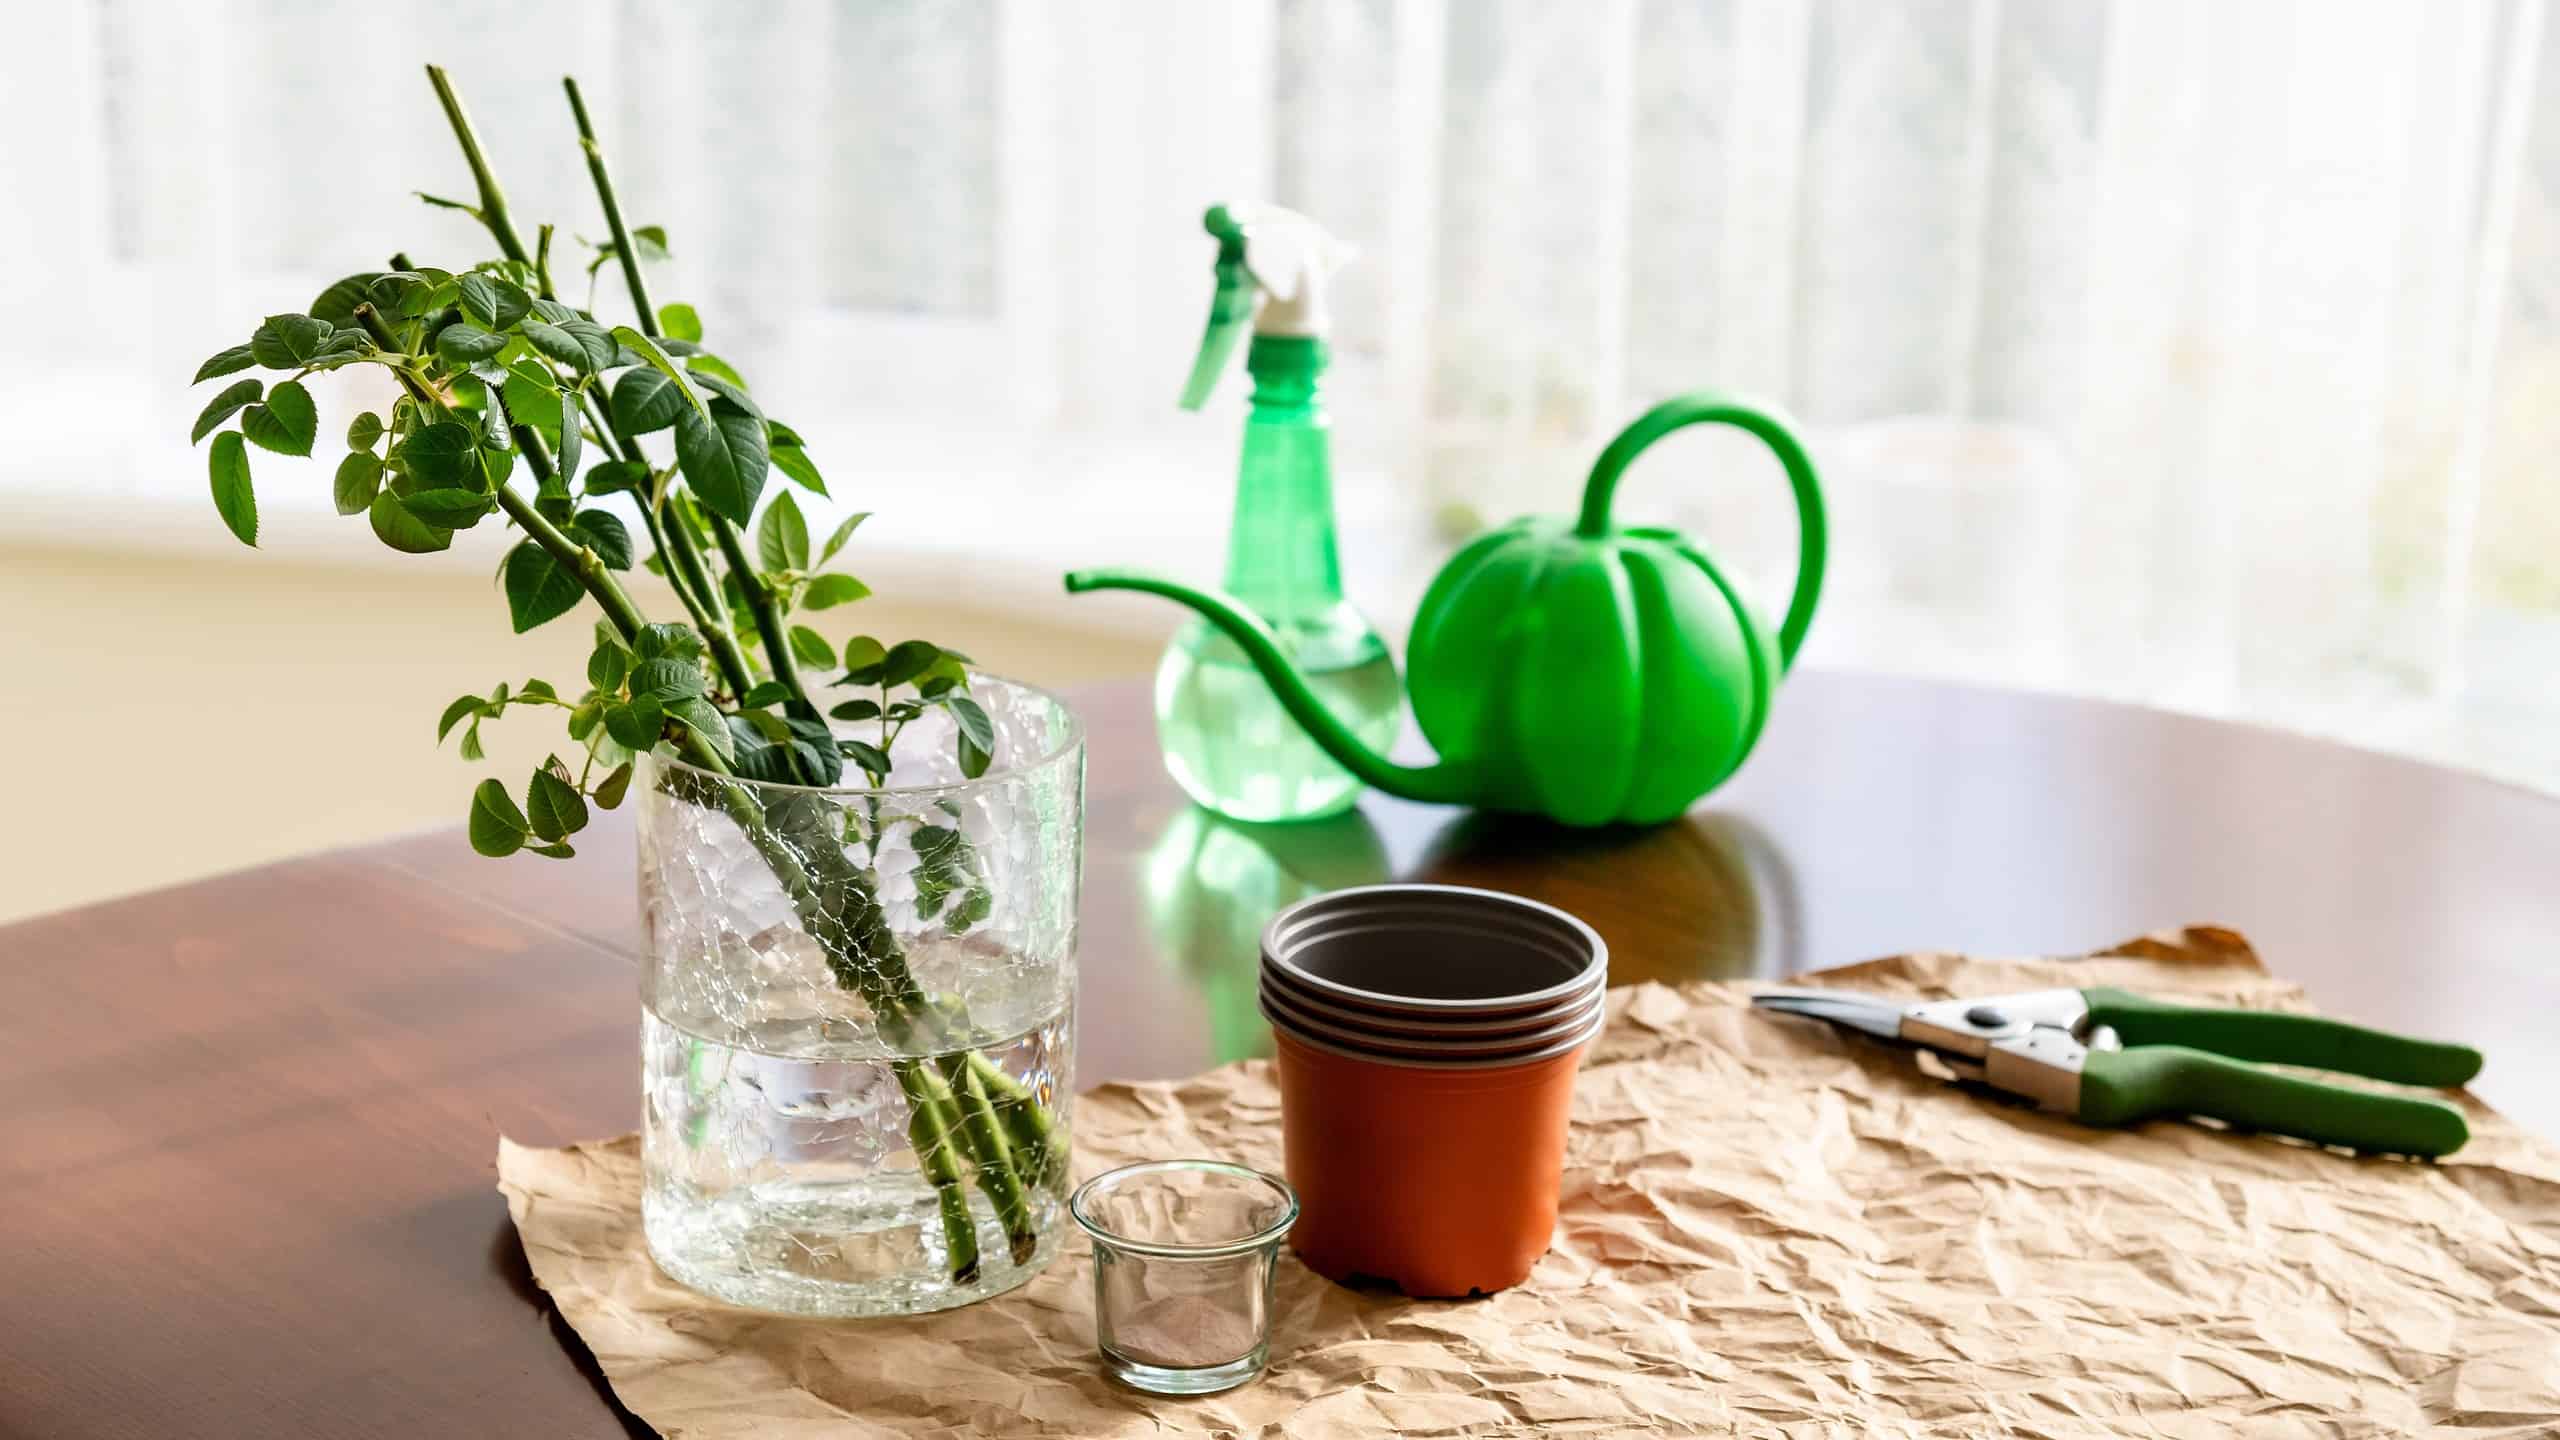 n the room on the table there is a vase in which there are garden rose sprouts. Nearby are garden tools and a pot. From a series of photos about plant breeding, seedlings and plant propagation.